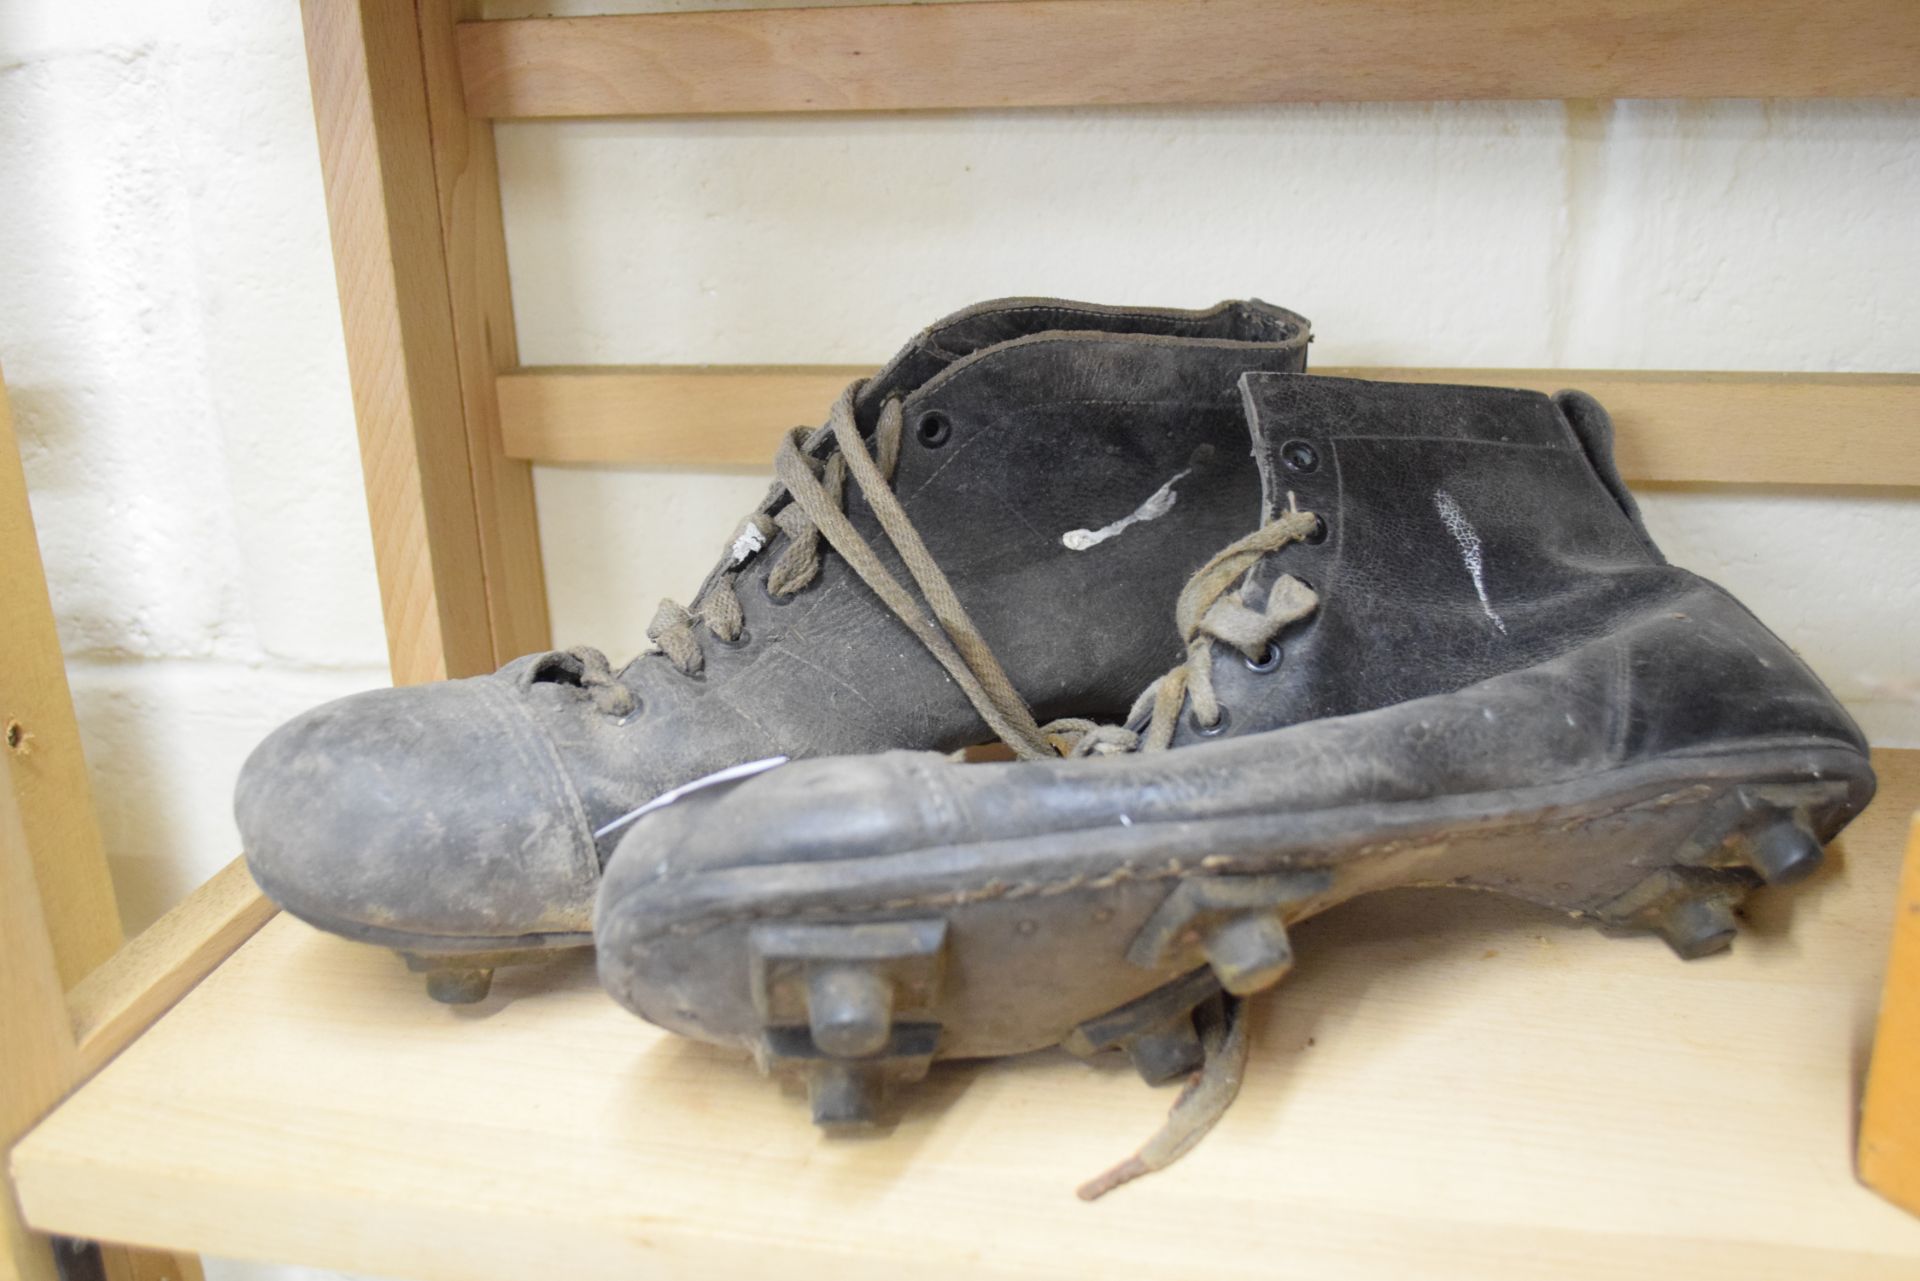 Pair of vintage sports style boots